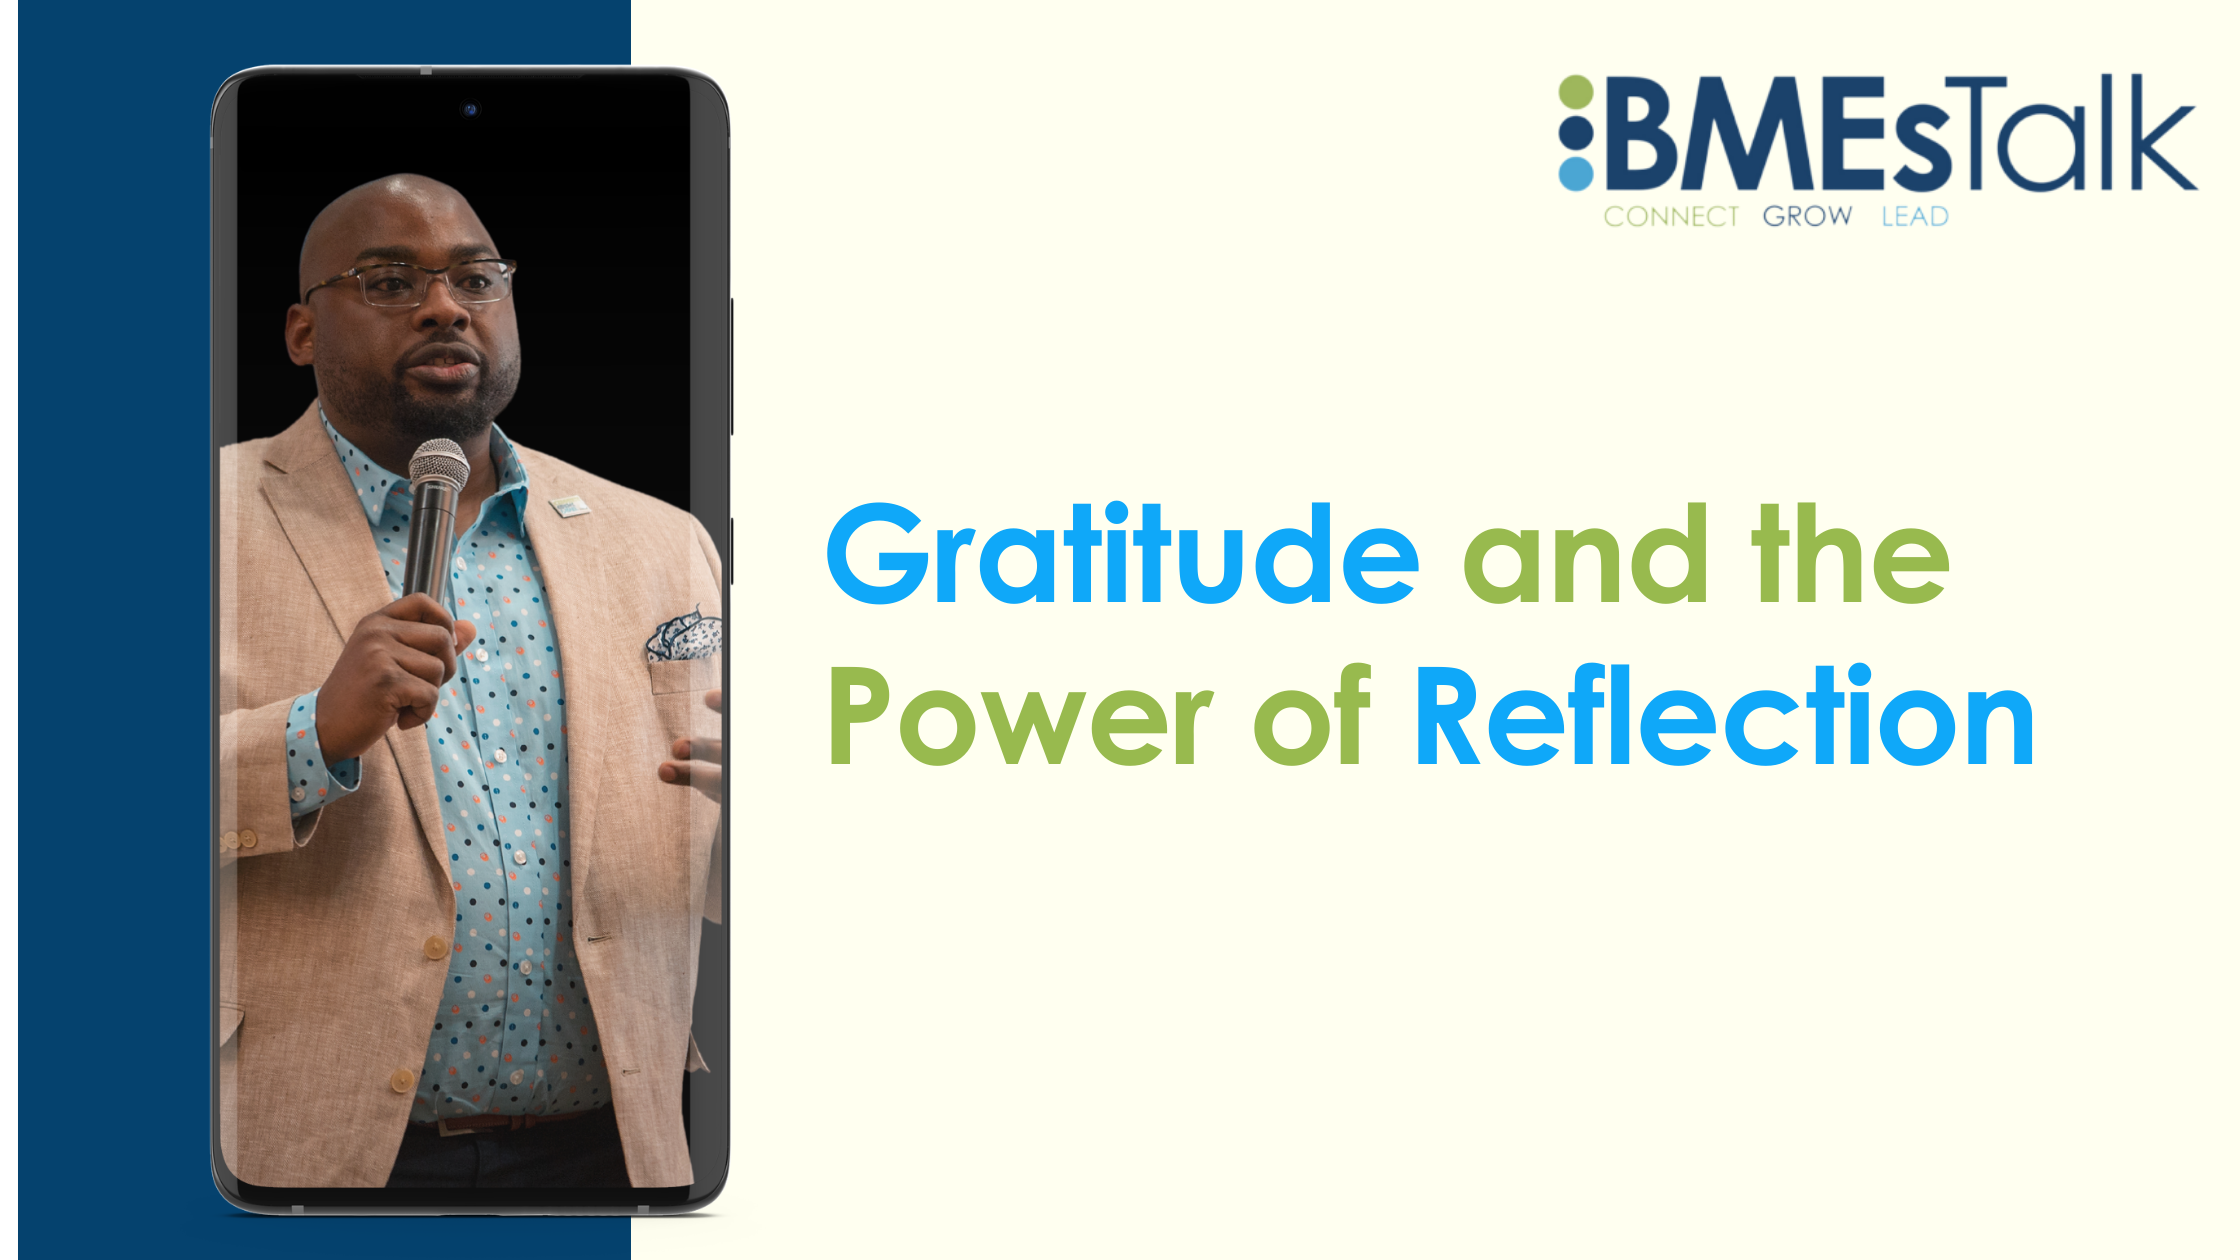 Gratitude and the Power of Reflection